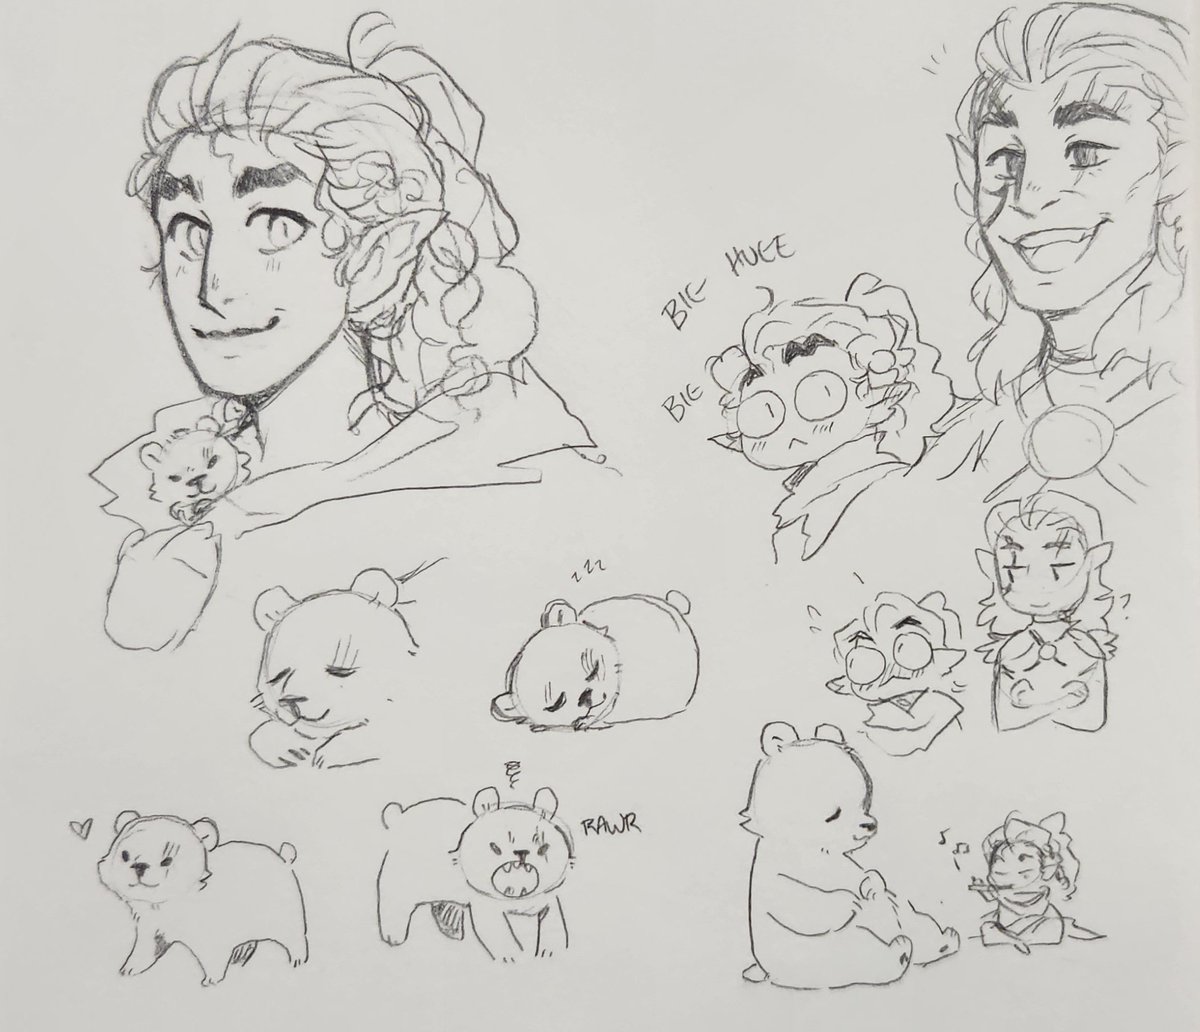 Lunch doodles! Lotan and a bunch of lil Halsin bears